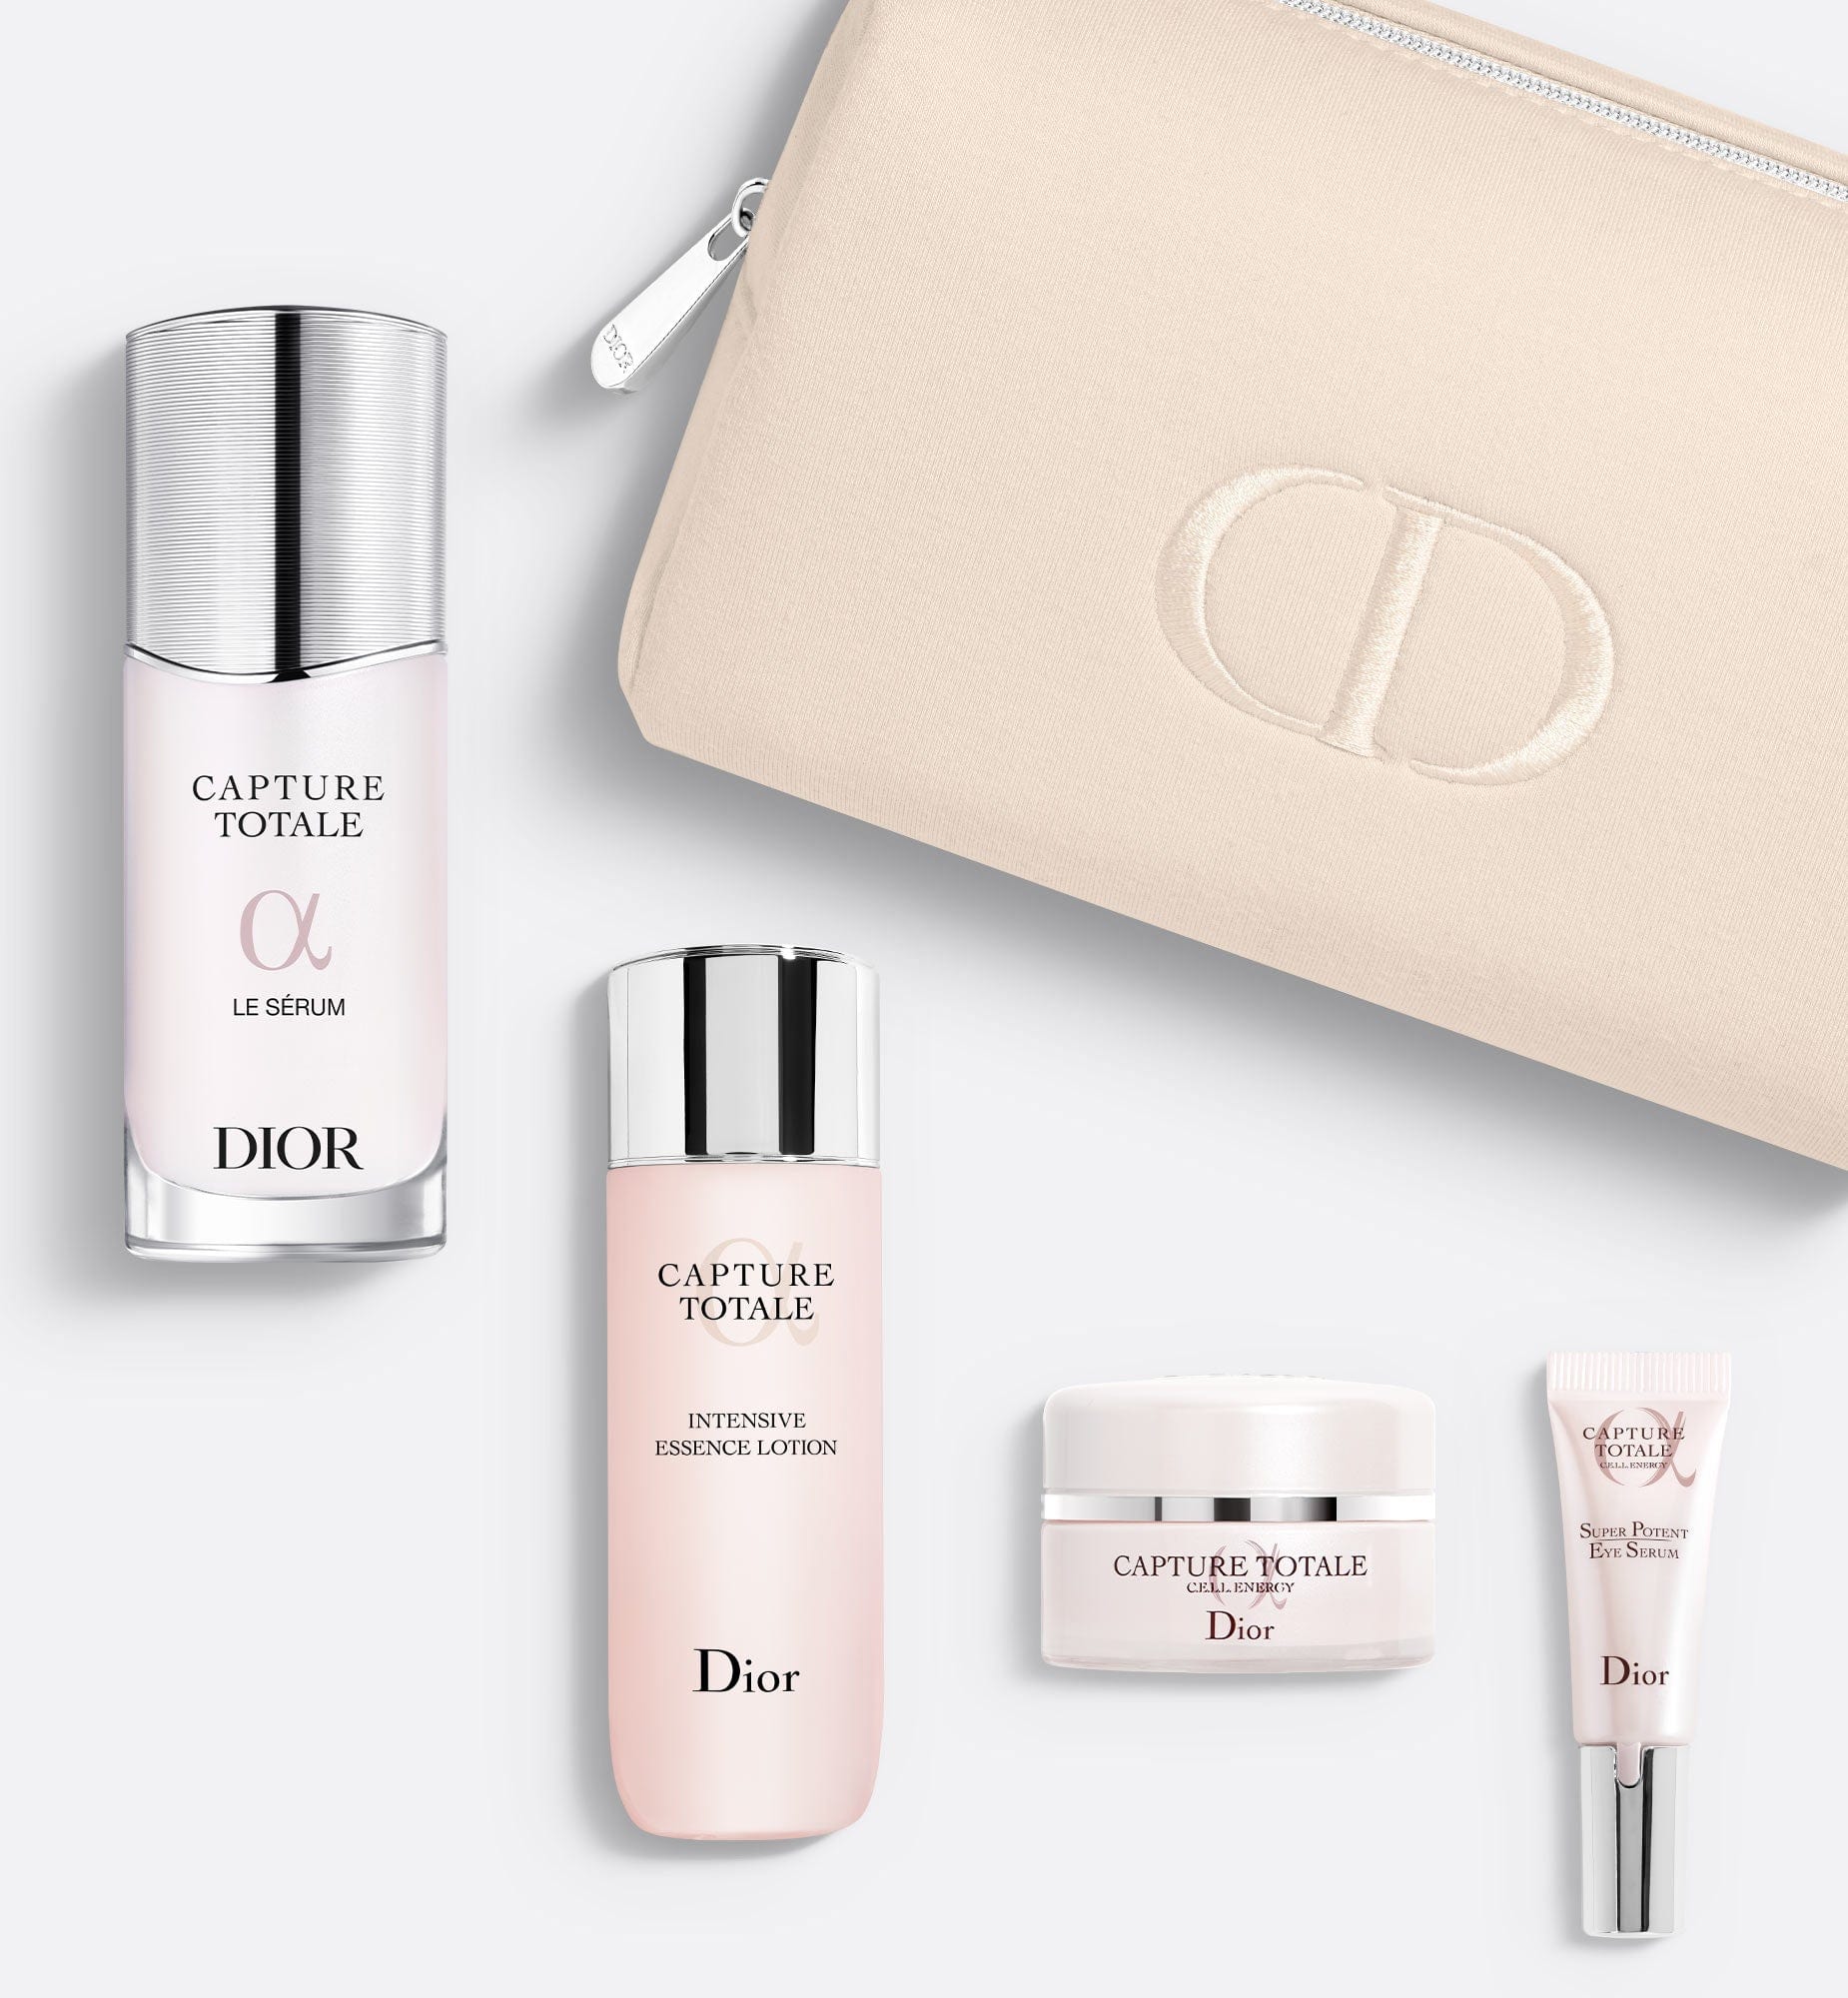 WHATS NEW AT DIOR BEAUTY COMPLIMENTARY GIFTS AND NEW CODE   YouTube